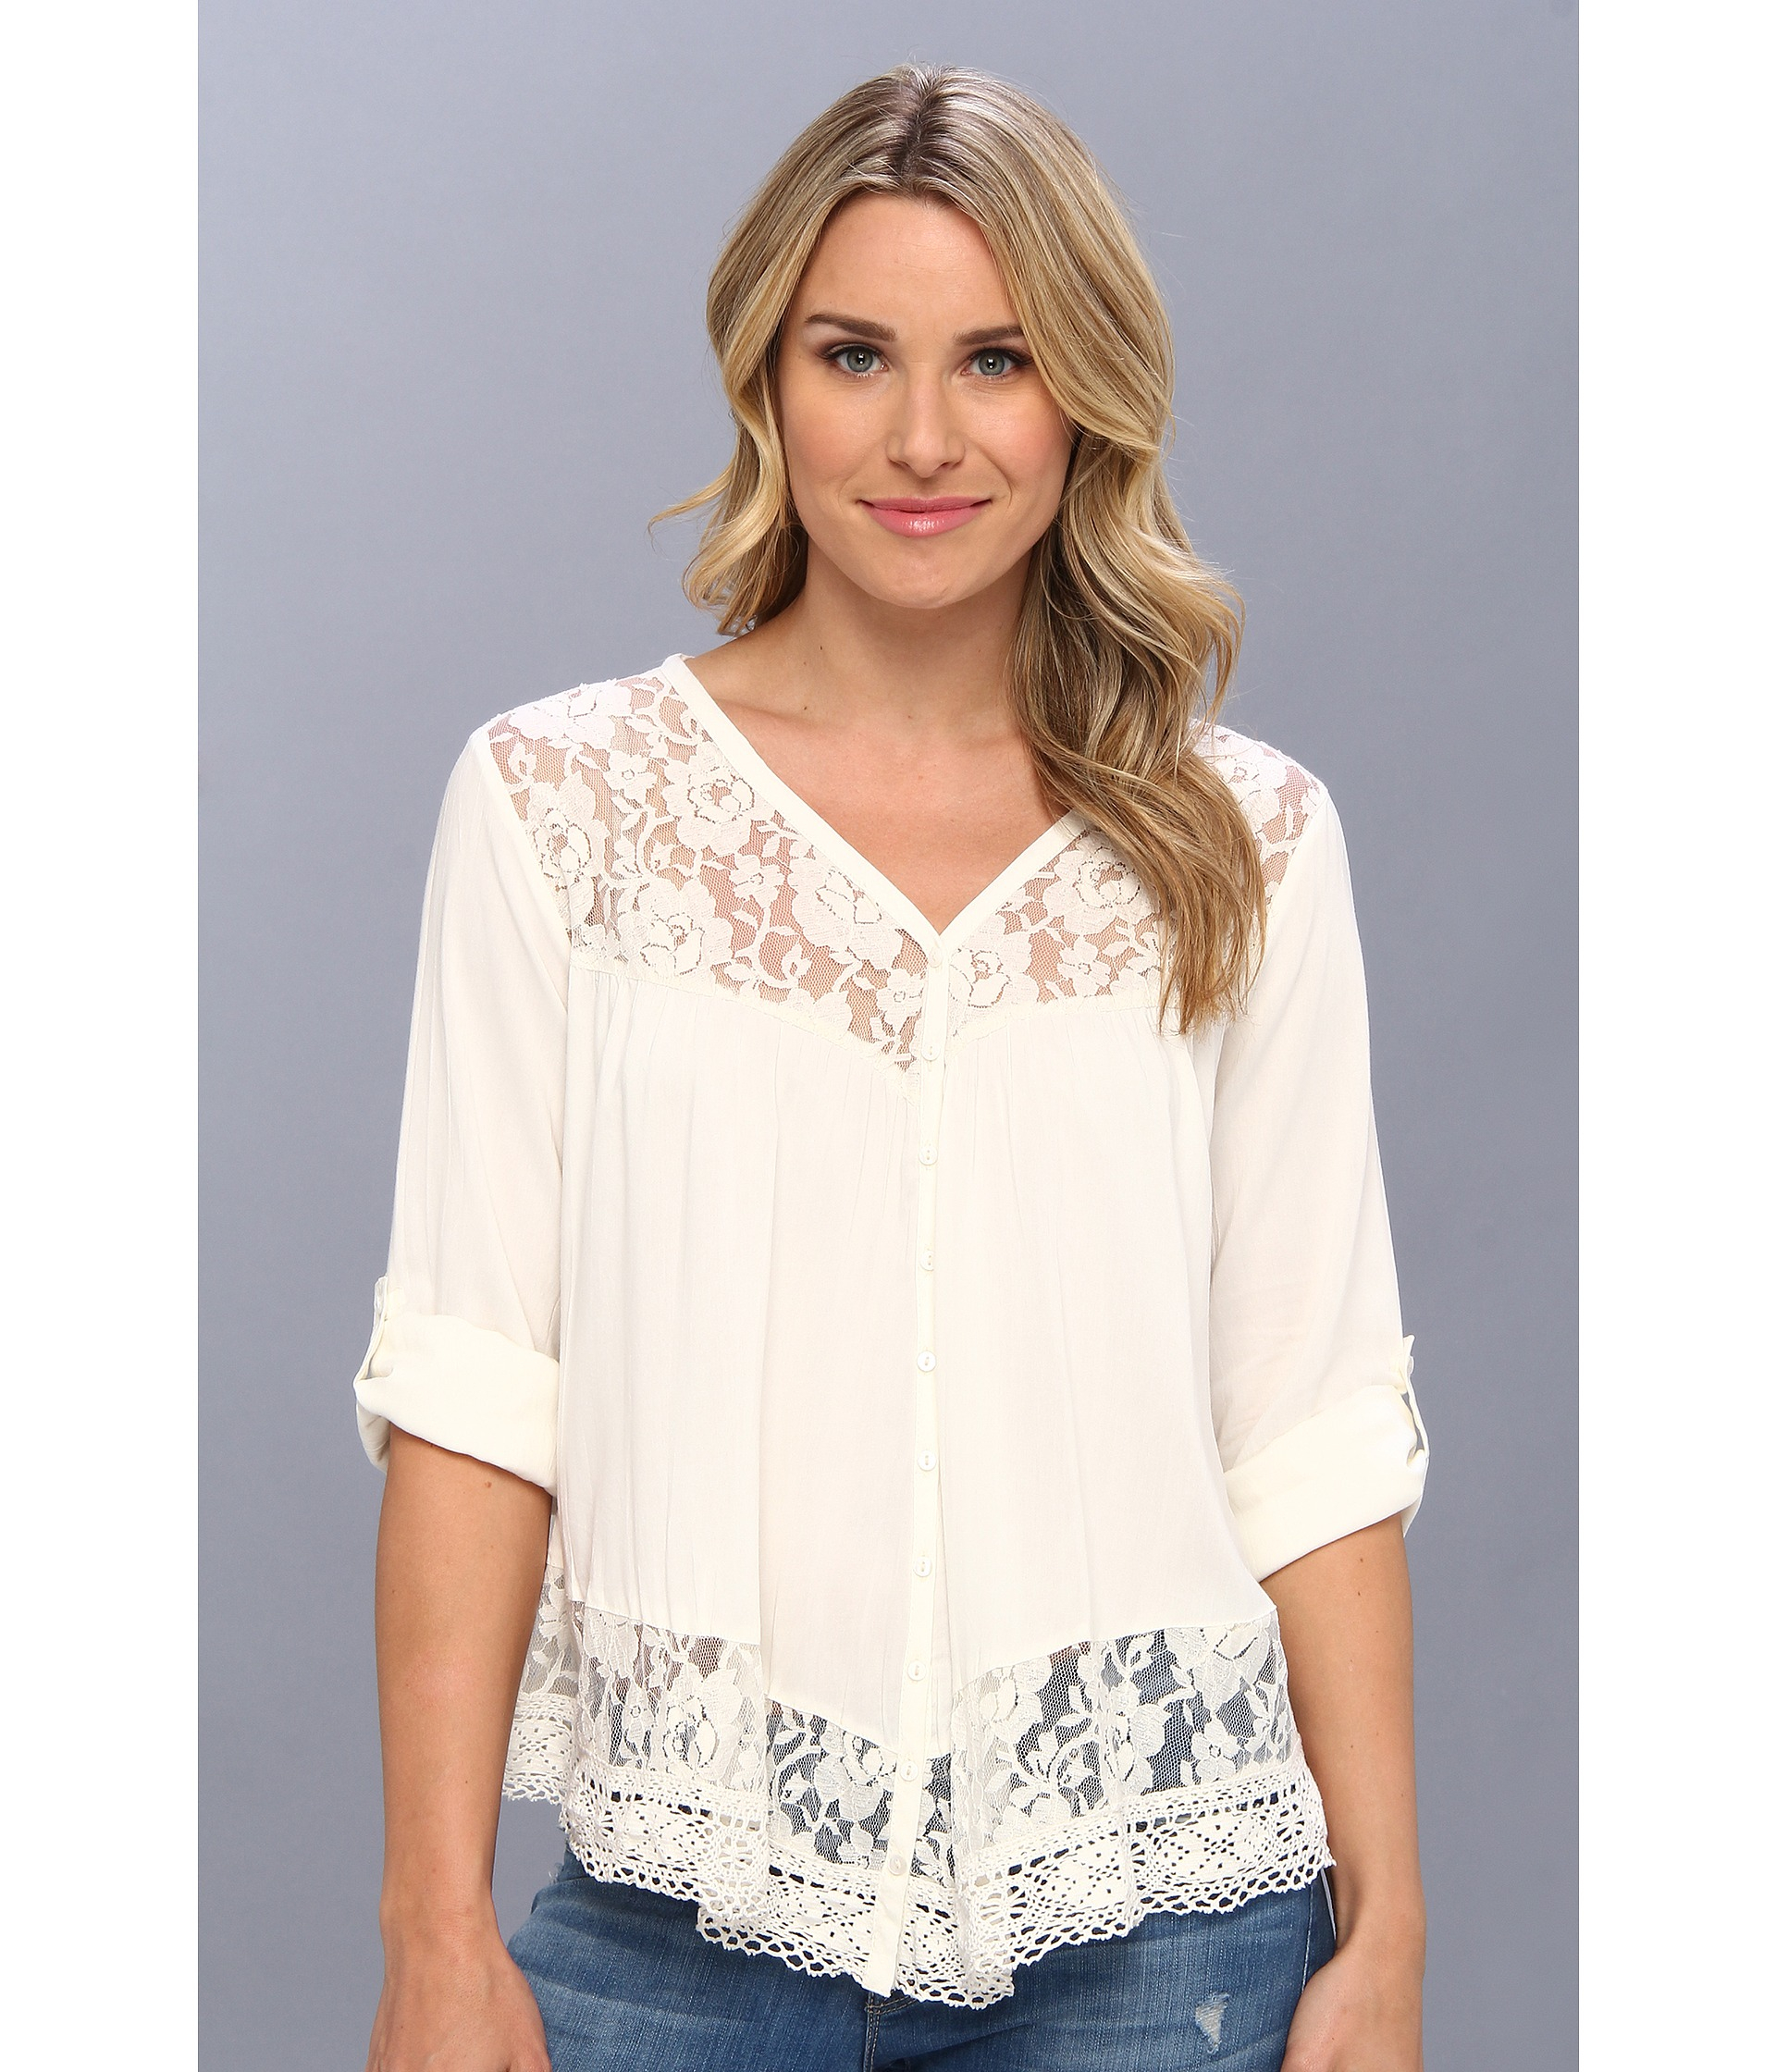 Lyst - Karen kane Rolled Sleeve Contrast Lace Blouse in Natural